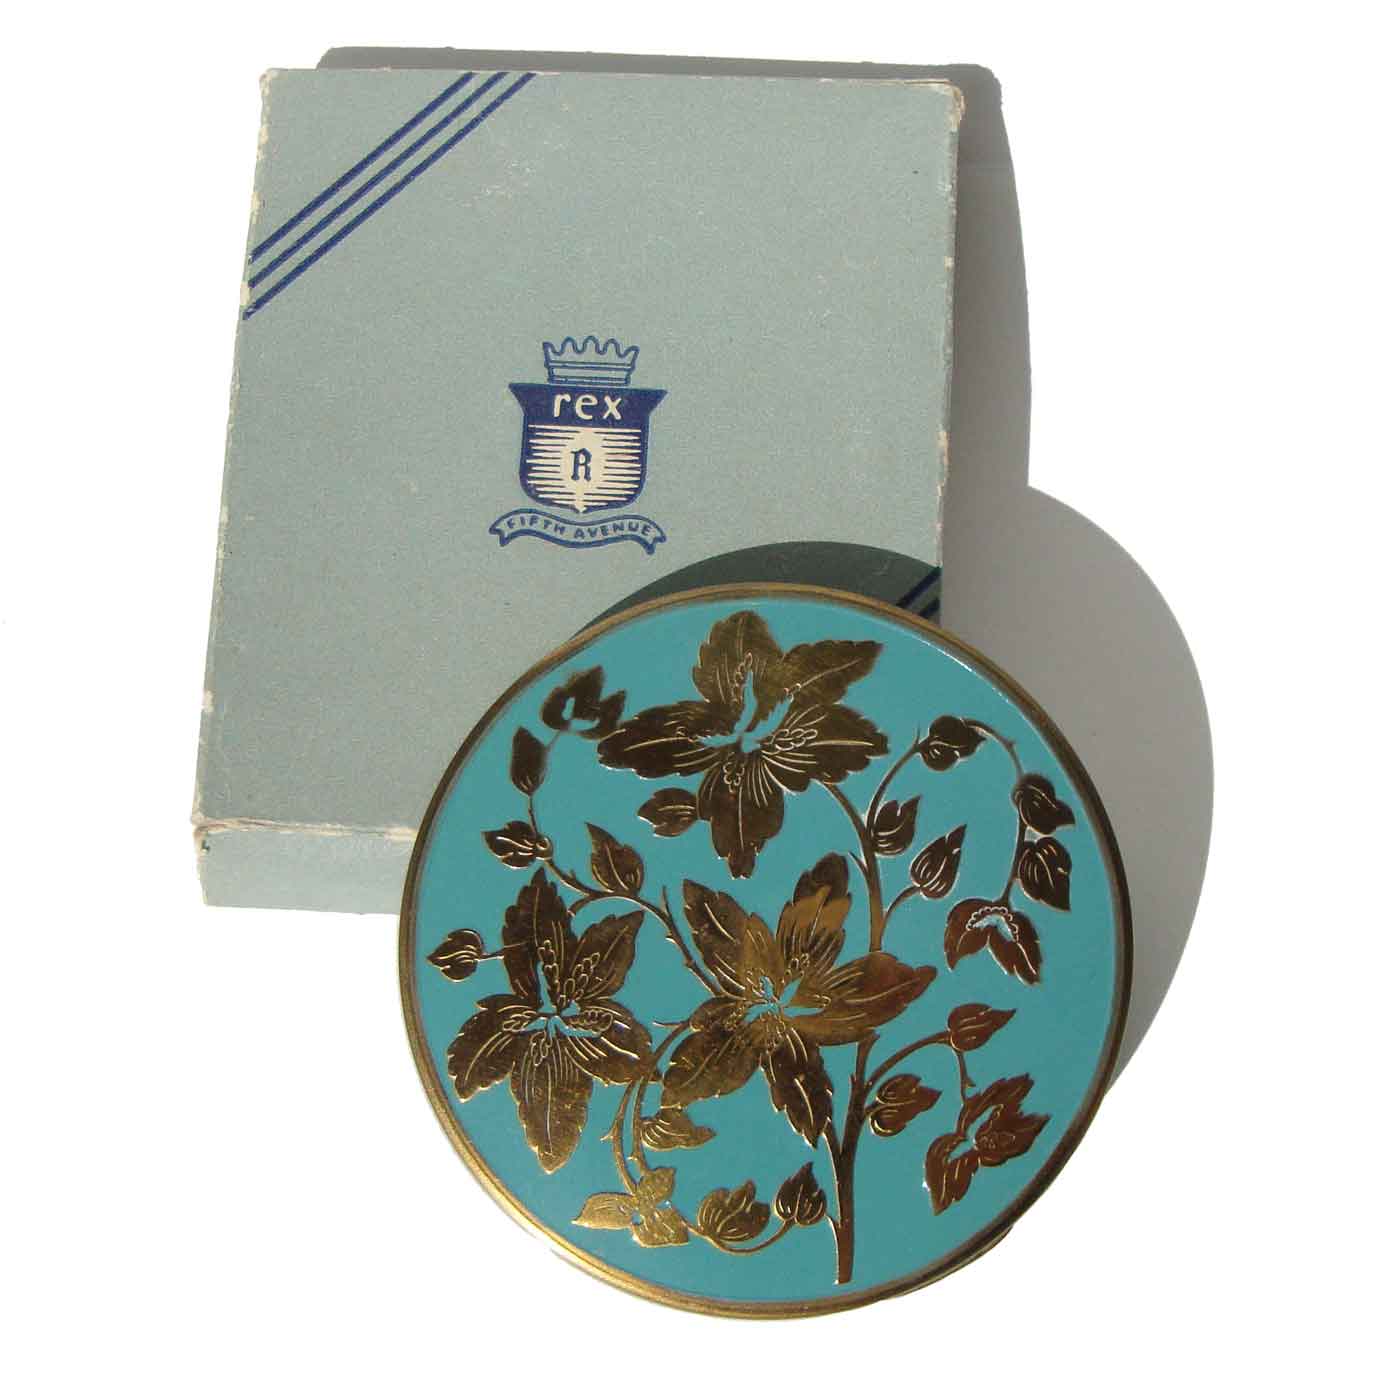 Vintage 40s Flapjack Compact Rex Fifth Ave Turquoise Enamel – Deadstock in Box  Edit alt text